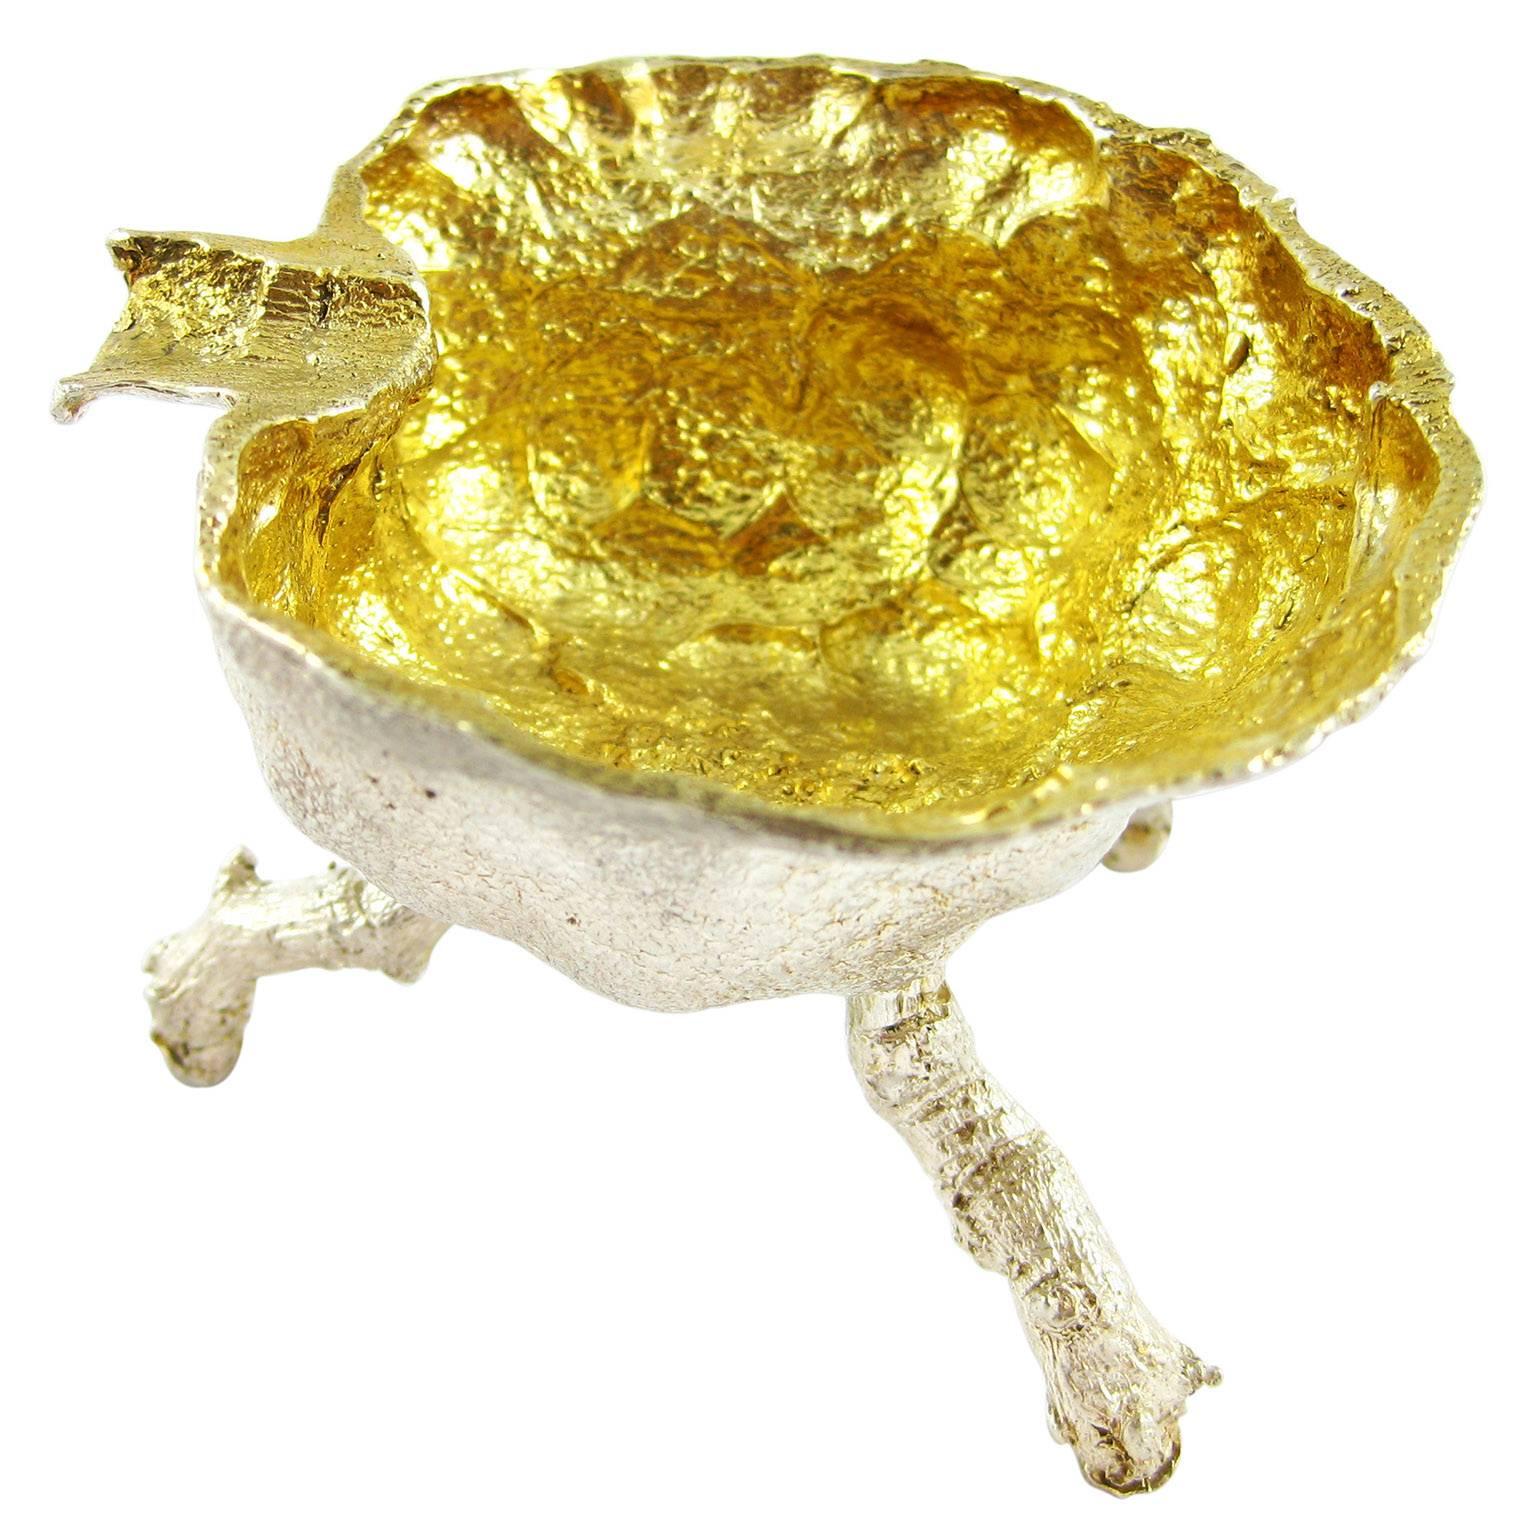 A beautiful addition to any table is the salt cellar in sterling silver with gold plated interior from K. Brunini’s Object d’Art collection.  This is sold as a single item and is complimented by K. Brunini's spoon in either 18K yellow gold with a